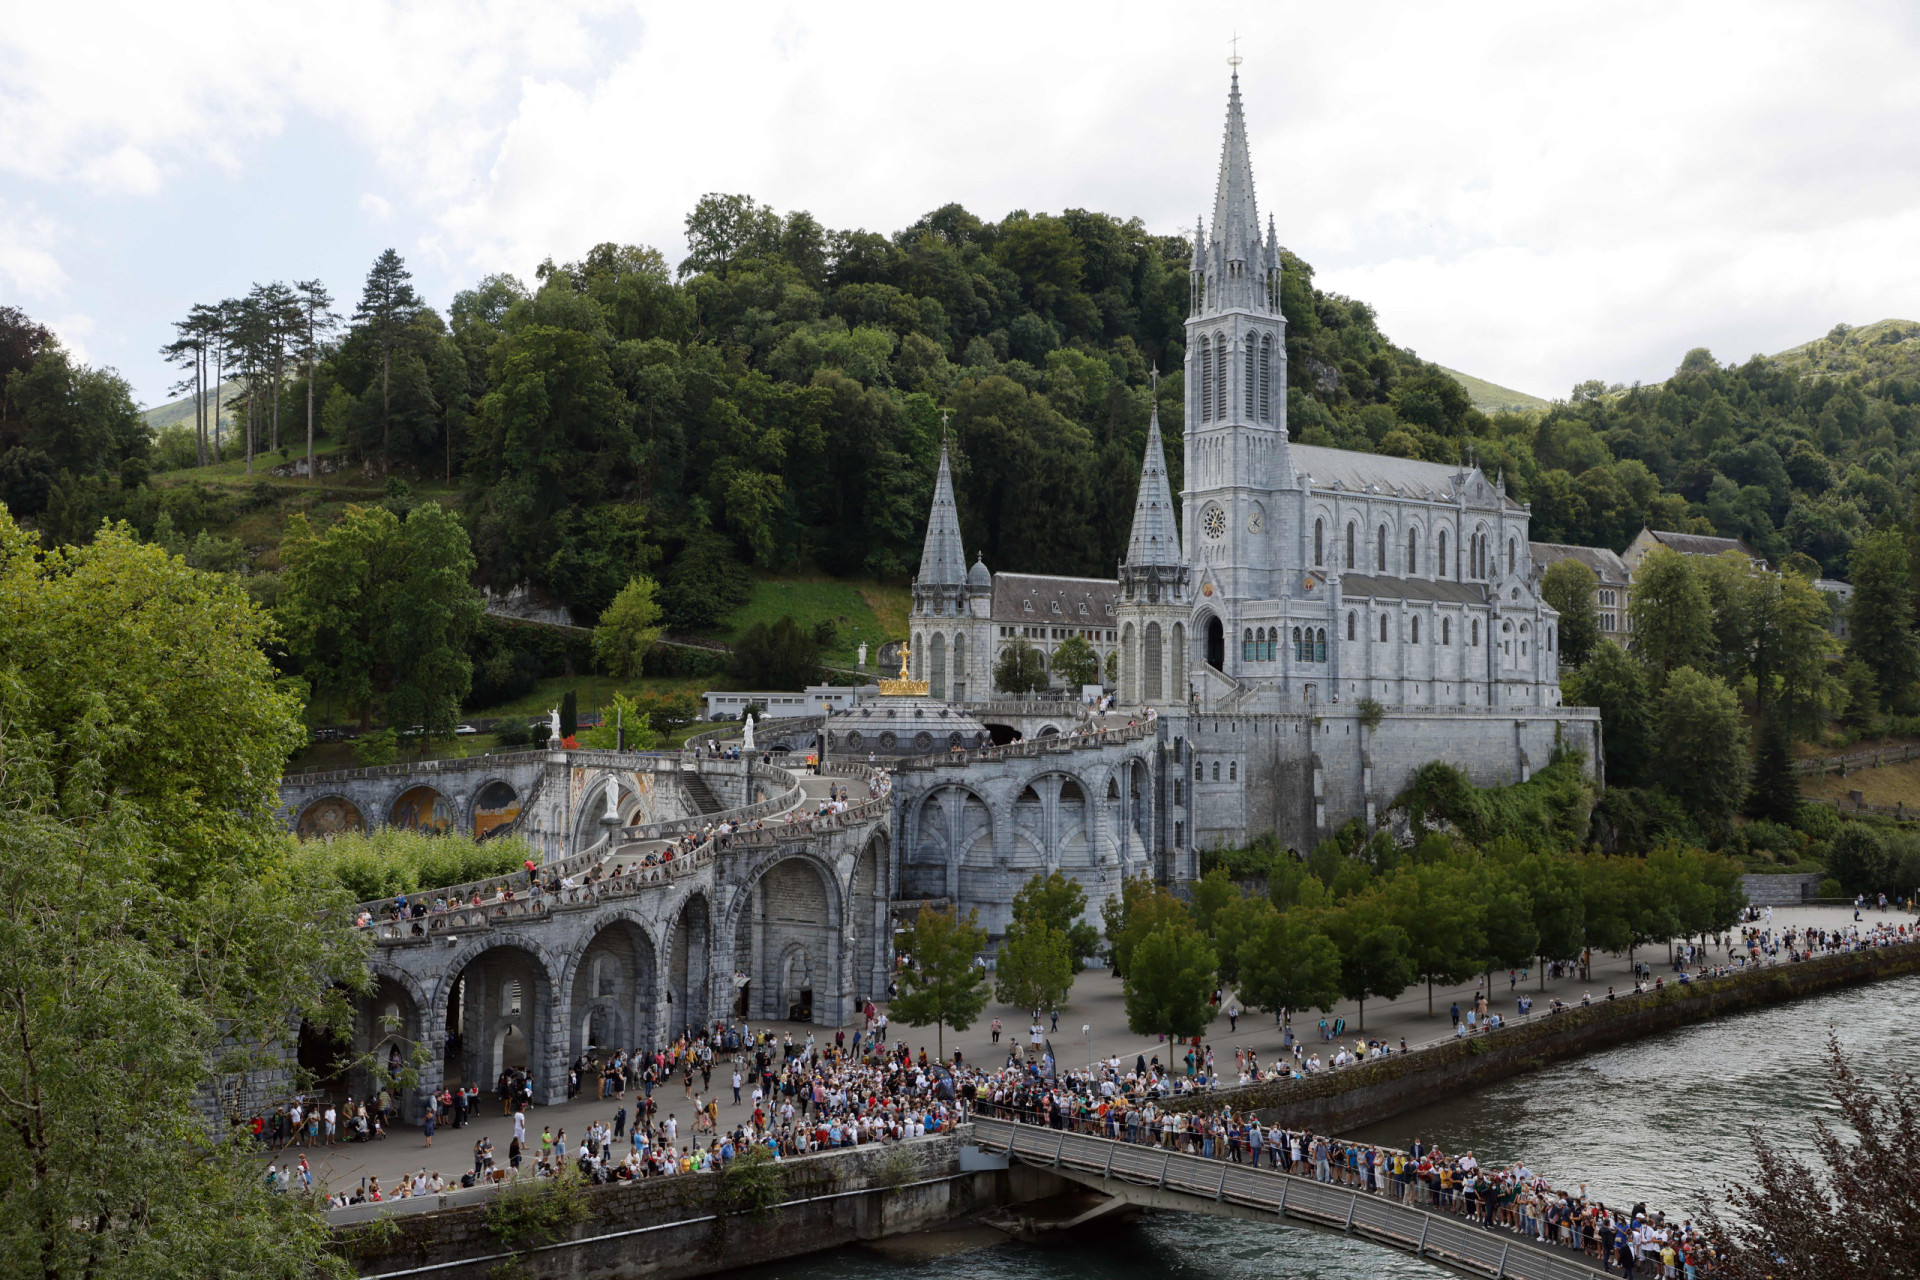 <p>The largest pilgrimage site in France, Lourdes is important due to the apparitions of Our Lady of Lourdes and the site's healing stream of water.</p><p>You may also like:<a href="https://www.starsinsider.com/n/206543?utm_source=msn.com&utm_medium=display&utm_campaign=referral_description&utm_content=524487en-us"> Bizarre things (some) Americans actually believe</a></p>